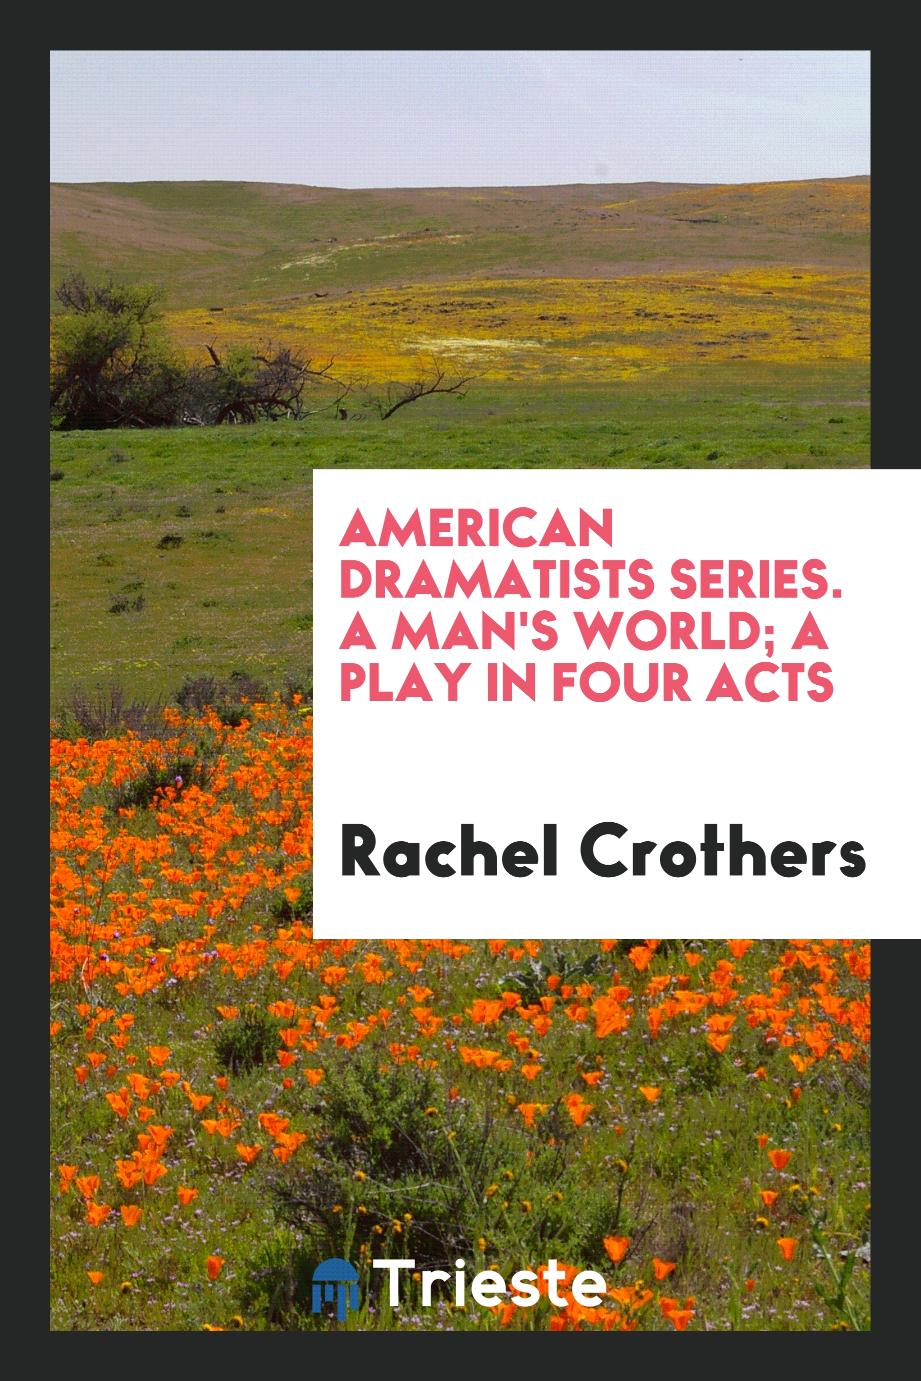 American Dramatists series. A man's world; a play in four acts